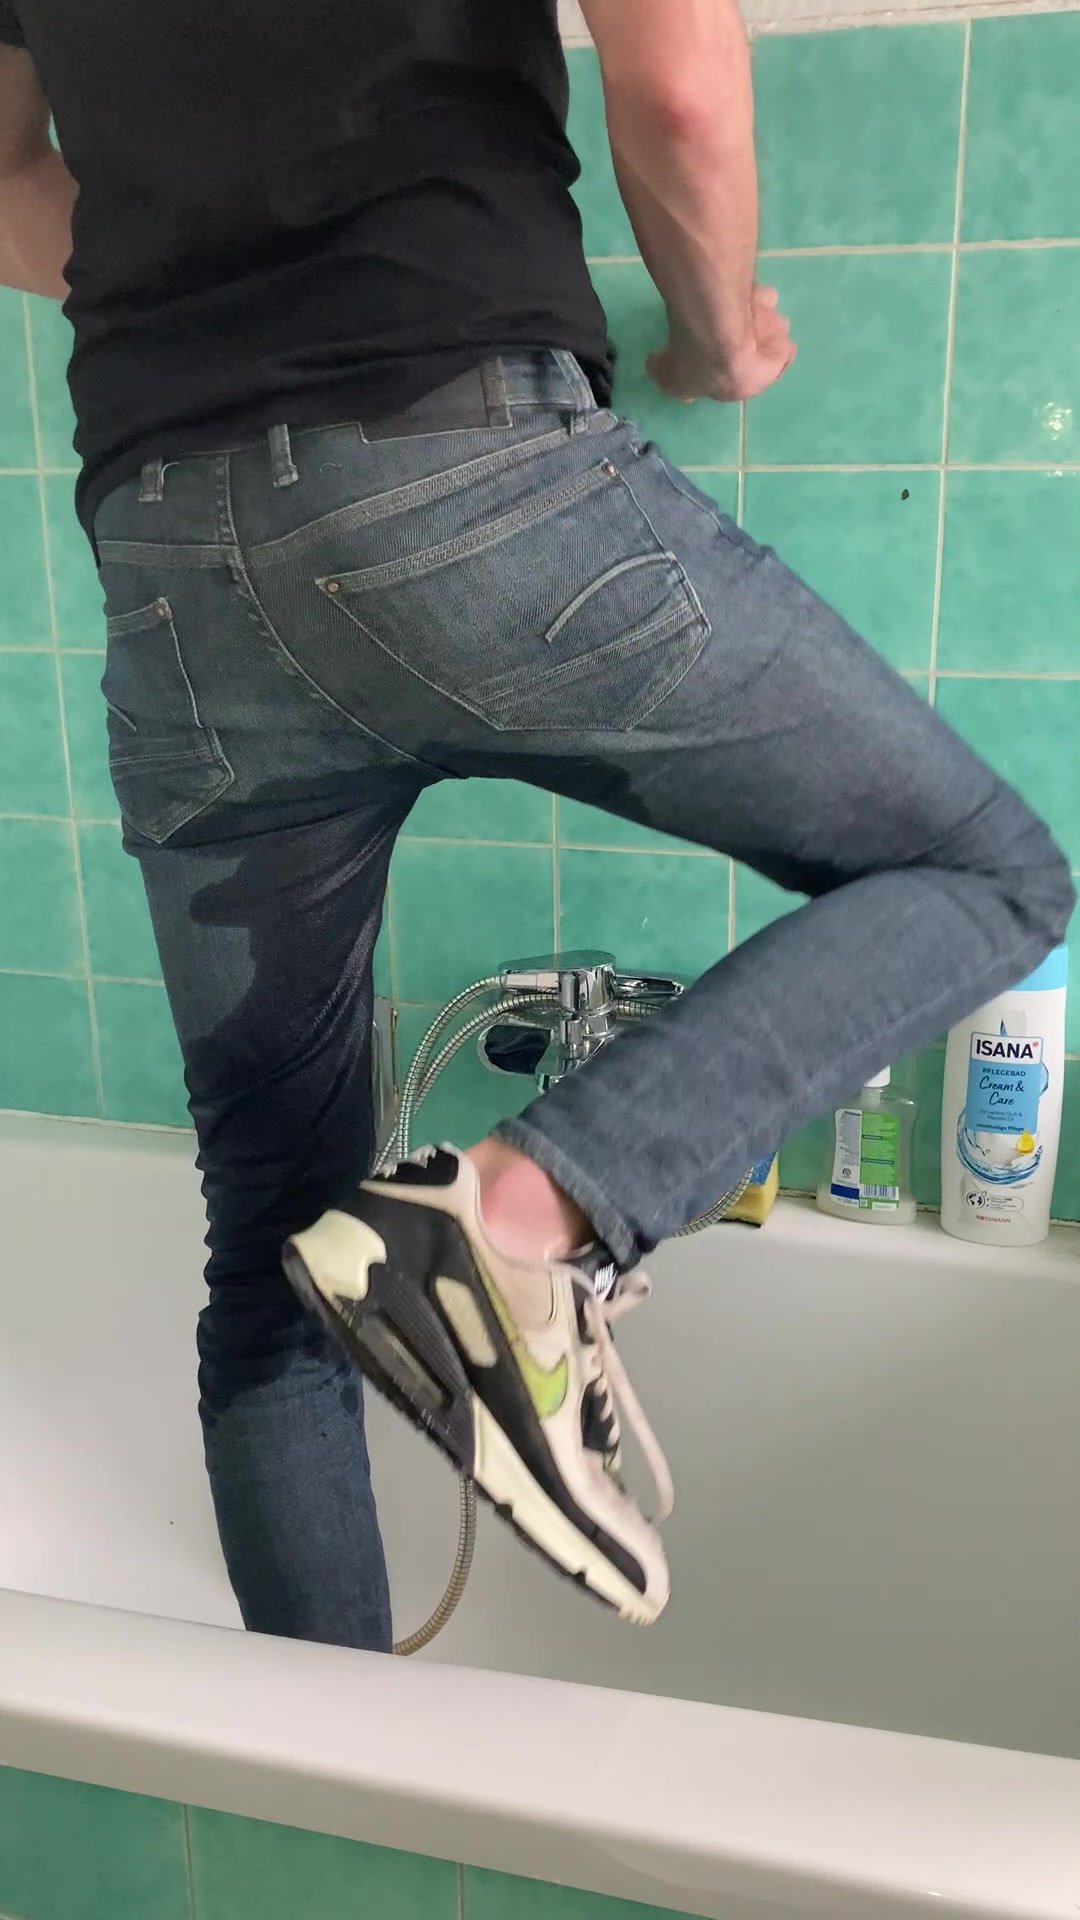 A jeans and a shower head